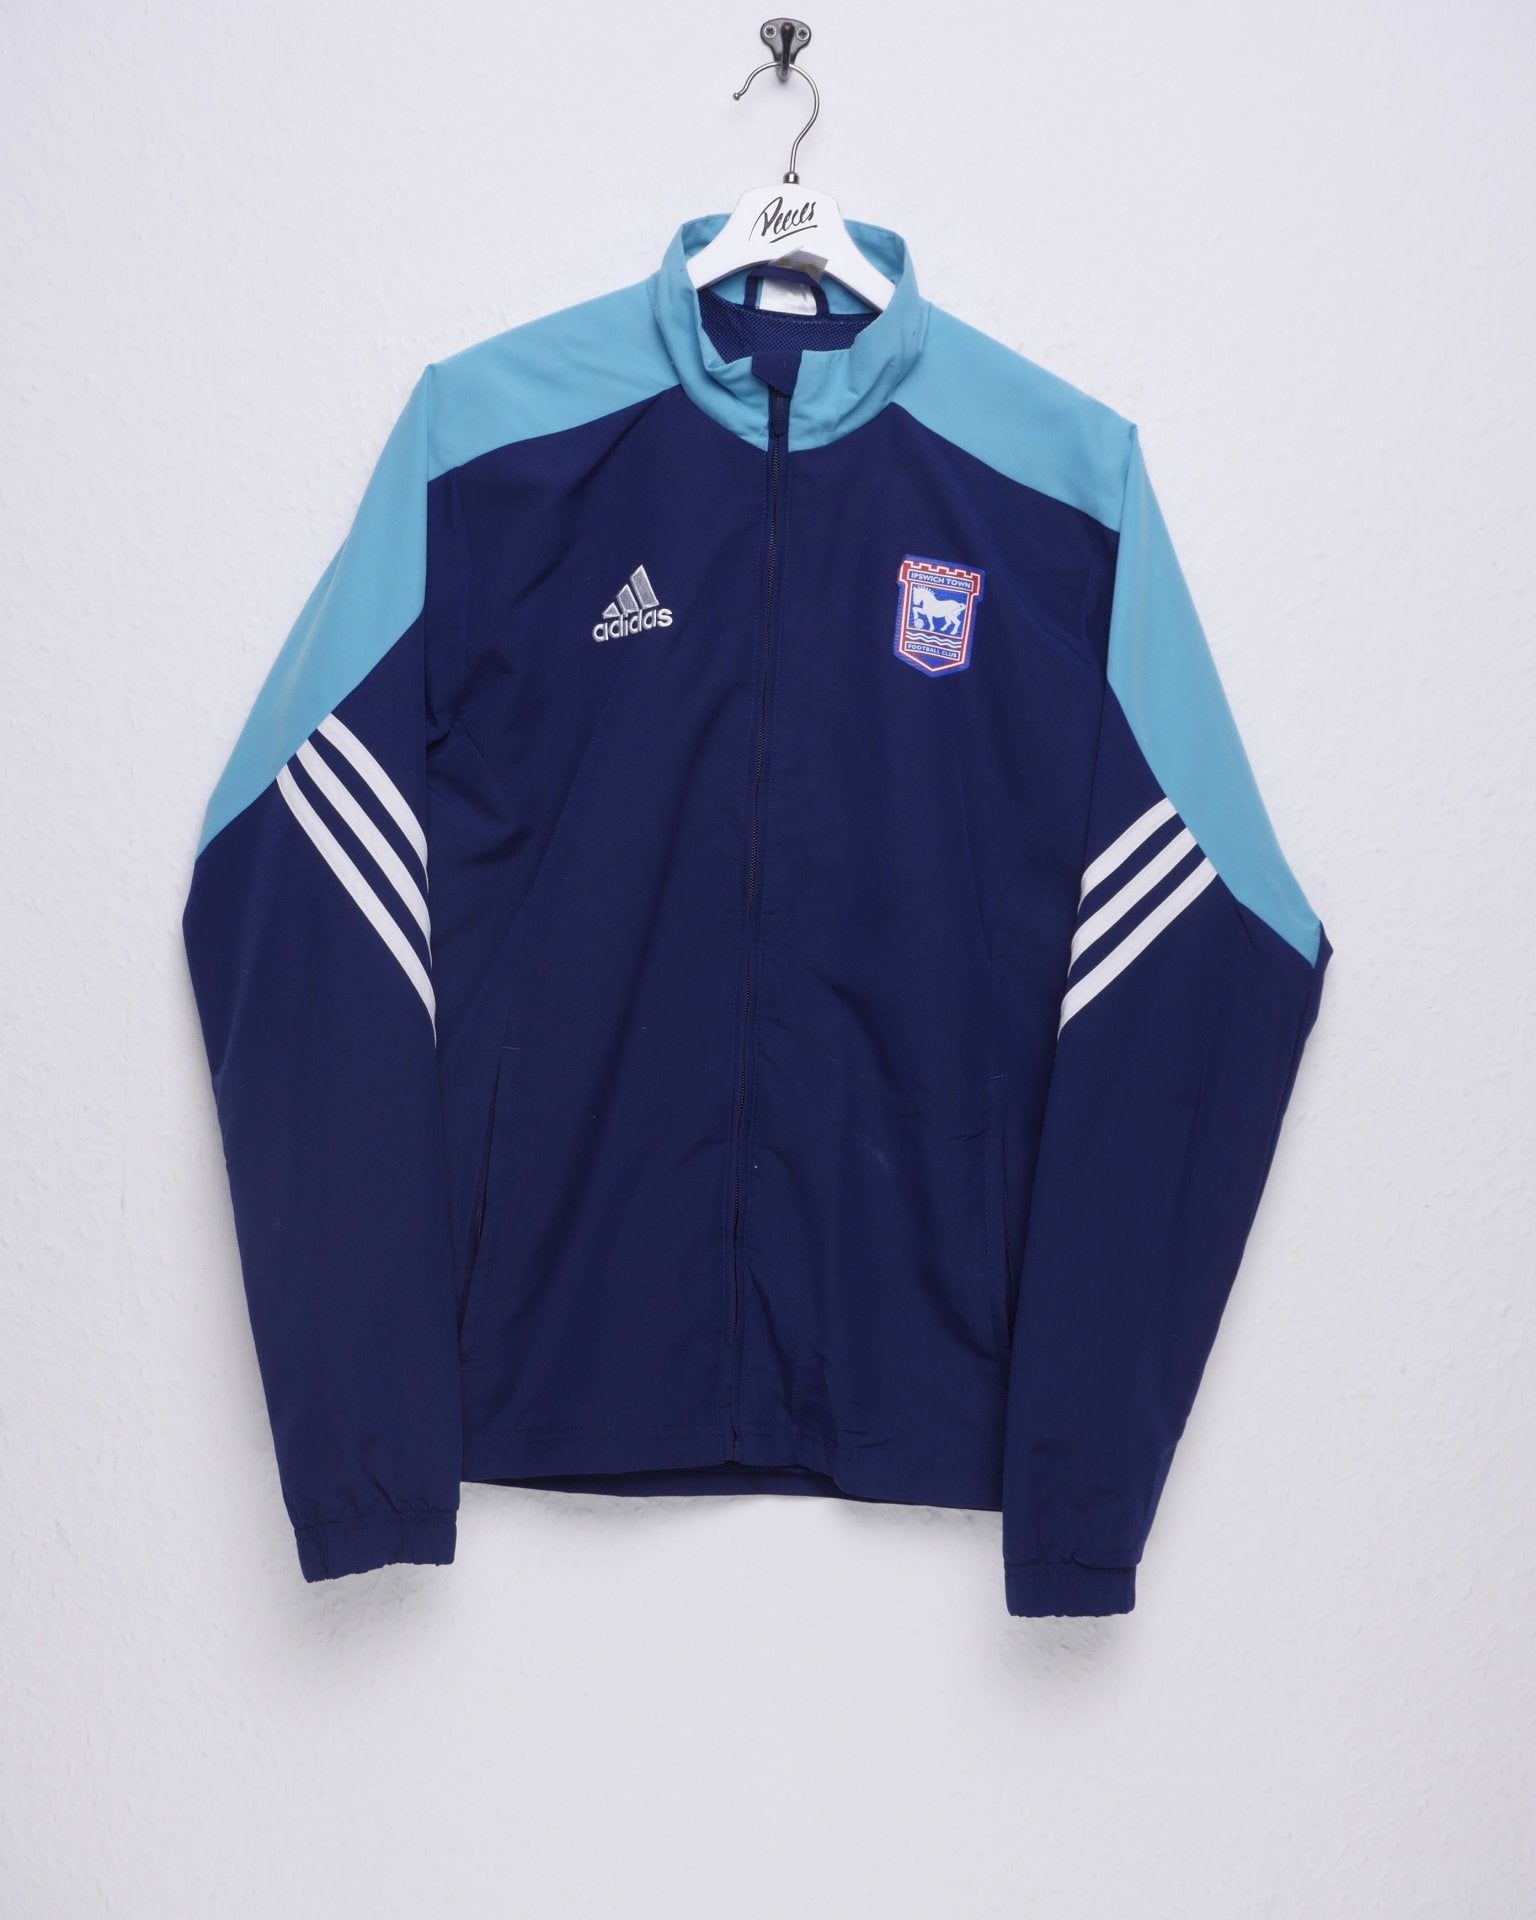 Adidas Ipswich tow football club embroidered Logo two tonedn Track Jacke - Peeces